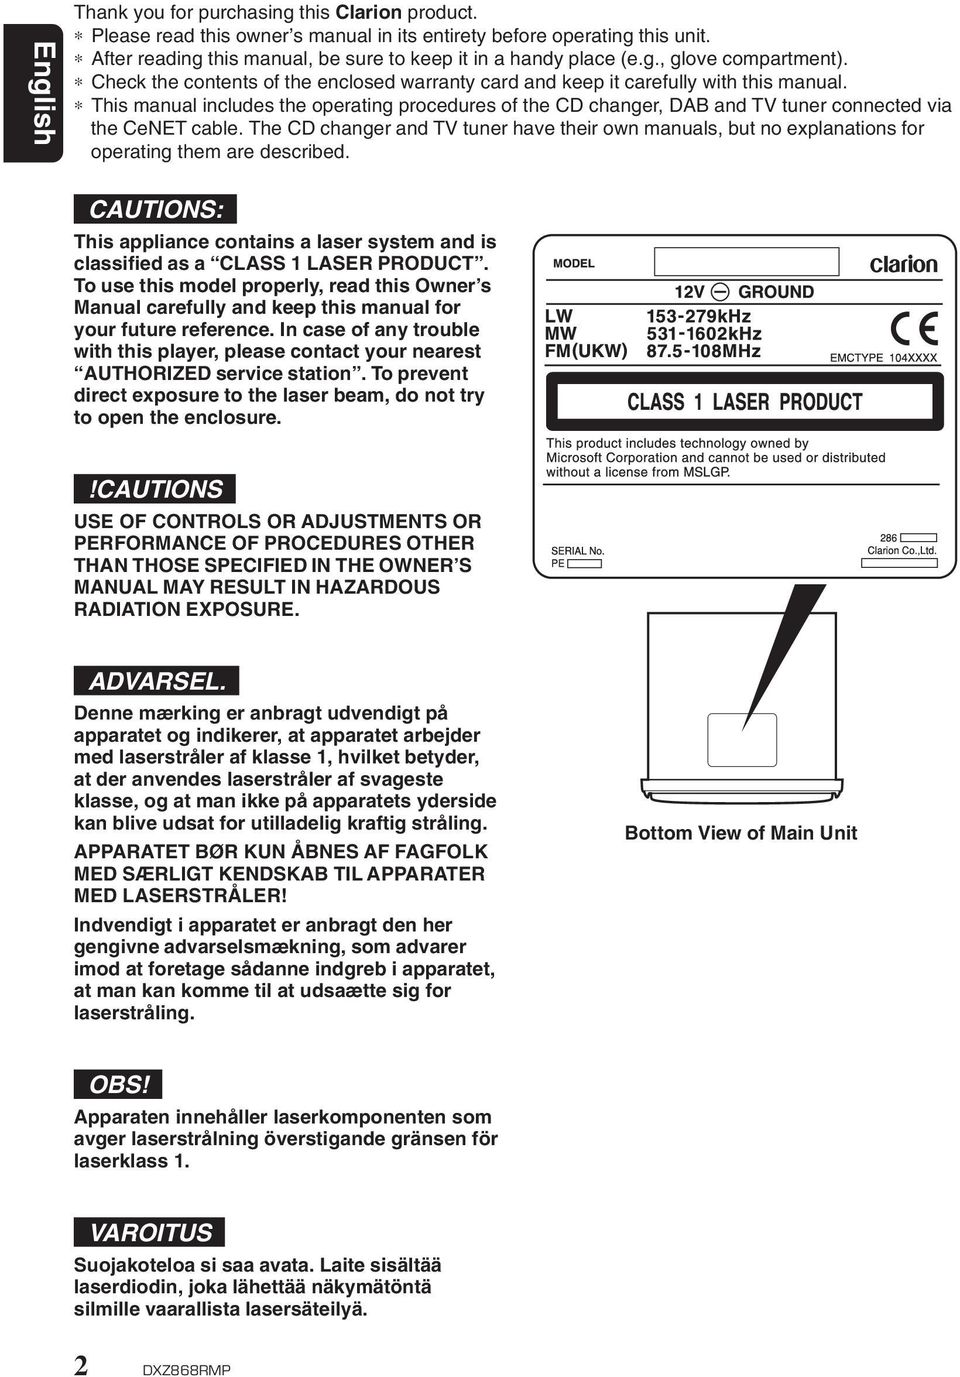 This manual includes the operating procedures of the CD changer, DAB and TV tuner connected via the CeNET cable.